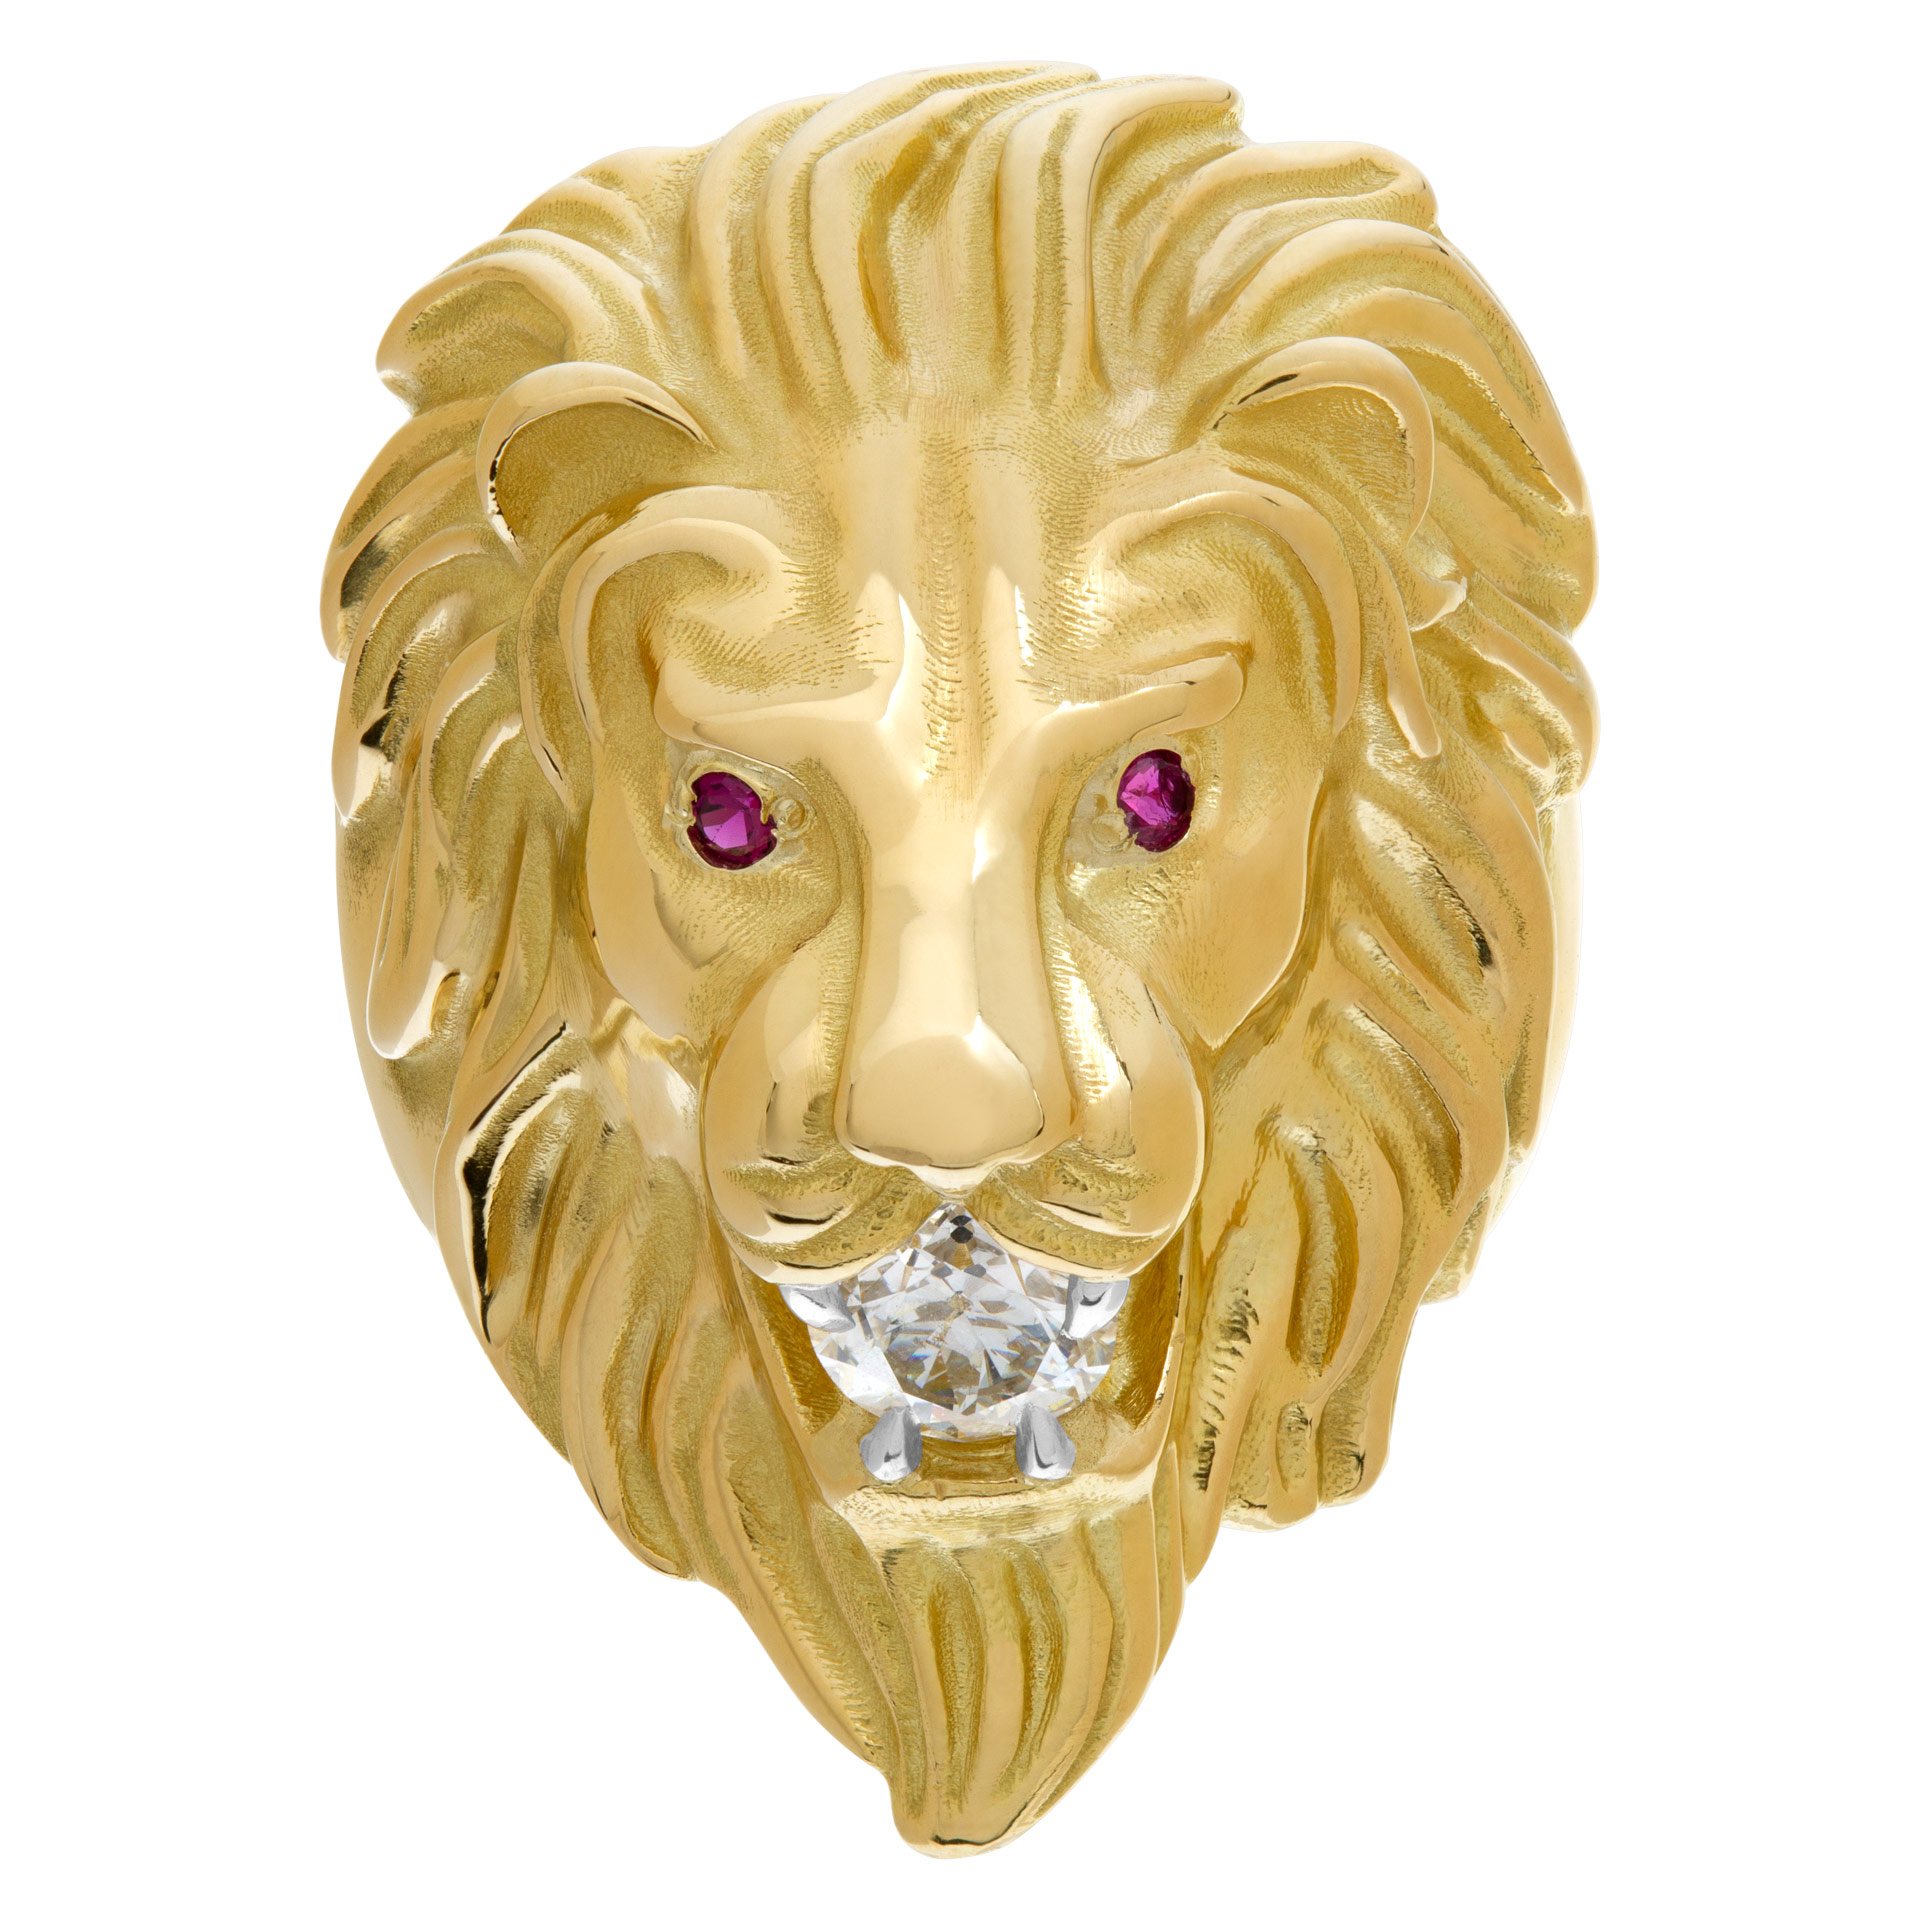 Magnificant 14k Yellow Gold Lion sculpted ring with 0.88 carat brilliant circular diamond held in the clutches of the lions mouth. Along with two stunning ruby eyes.